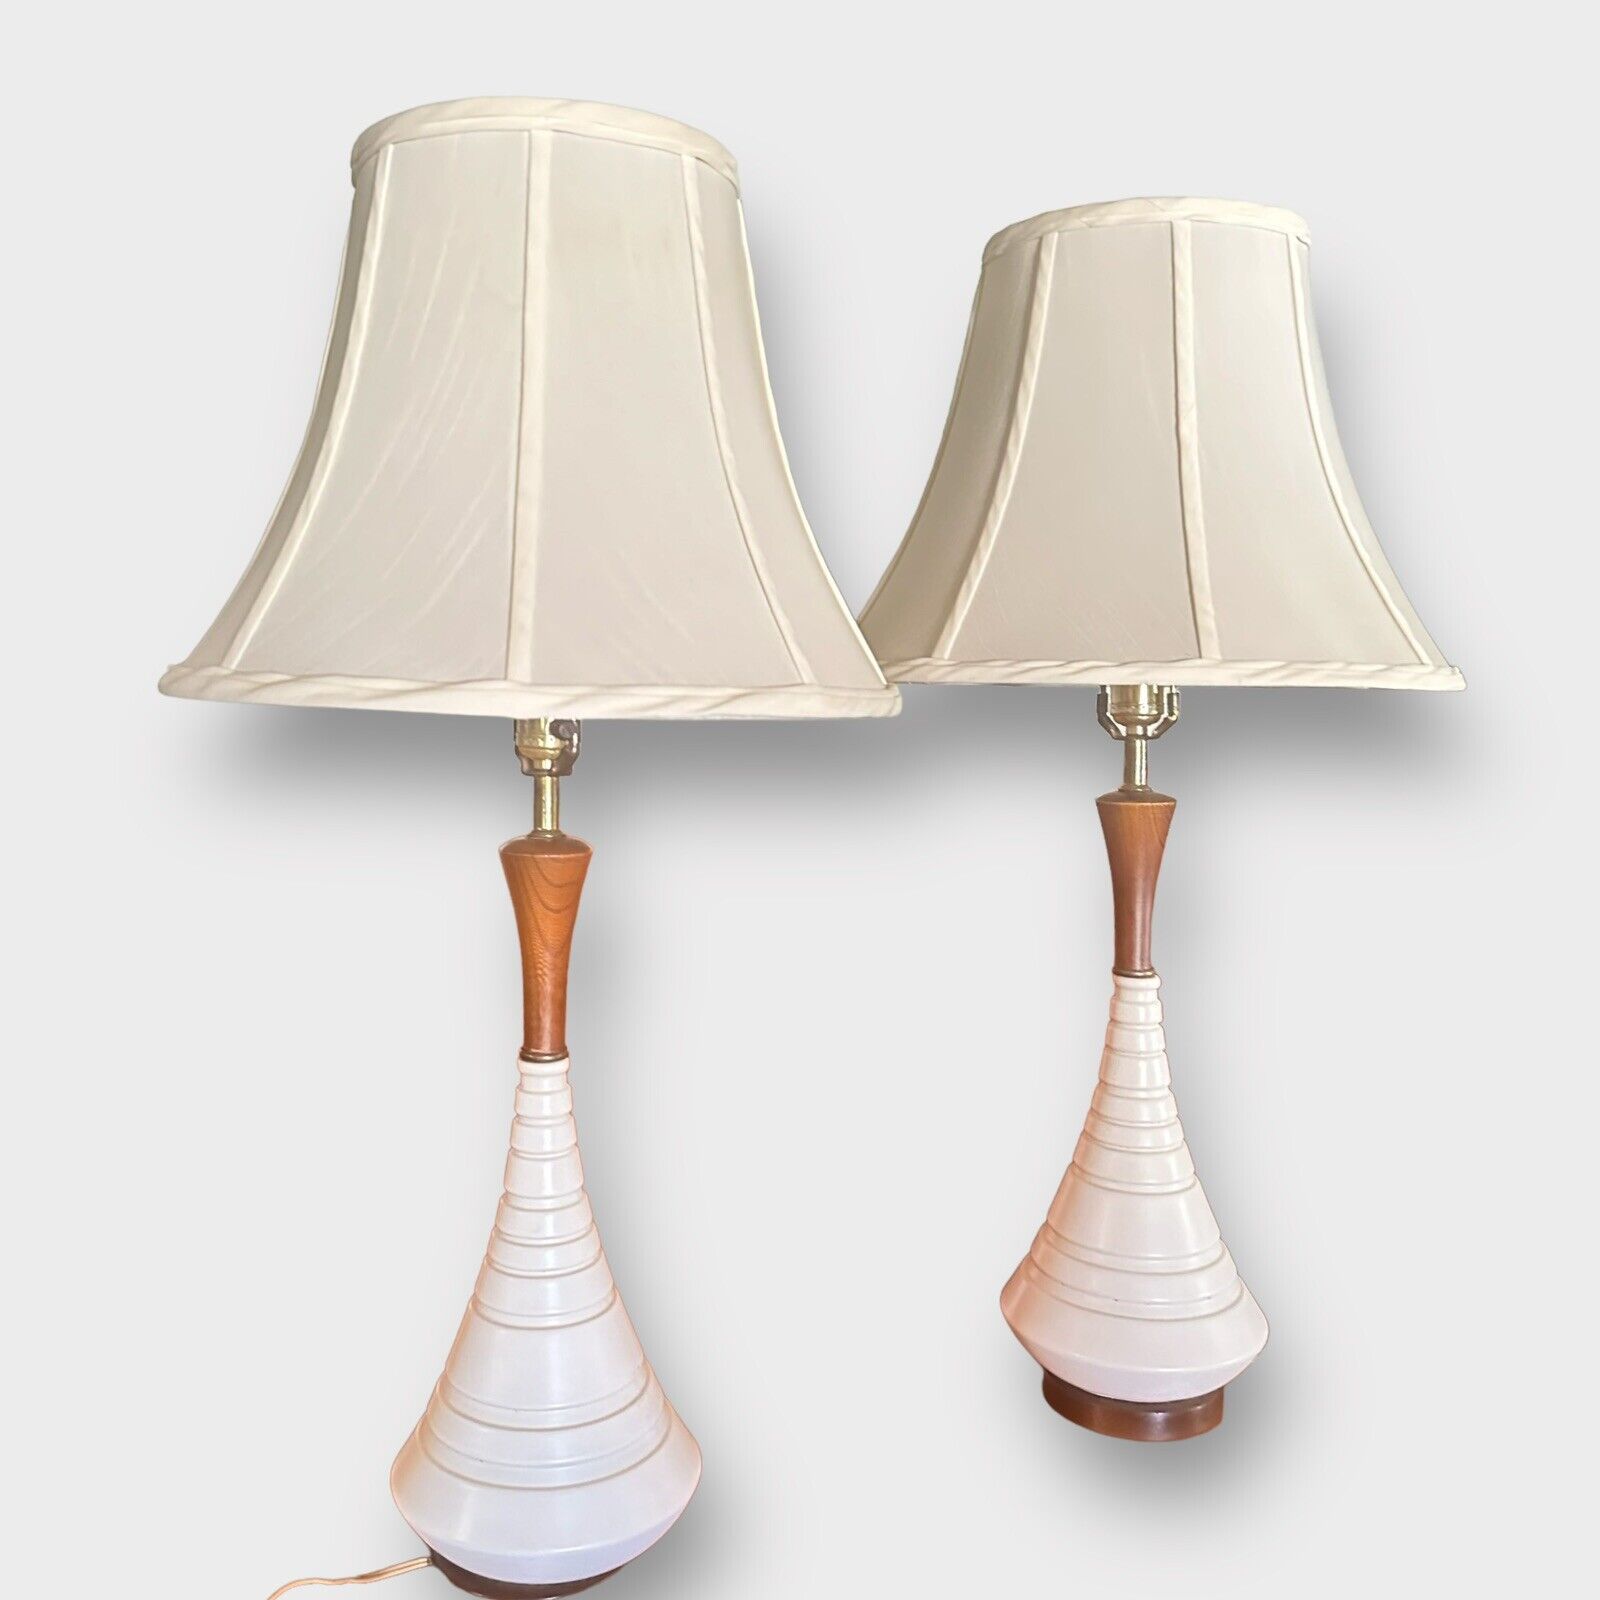 Vintage 1960s Mid Century Modern Table Lamps Creamy White Ceramic With Wood Neck